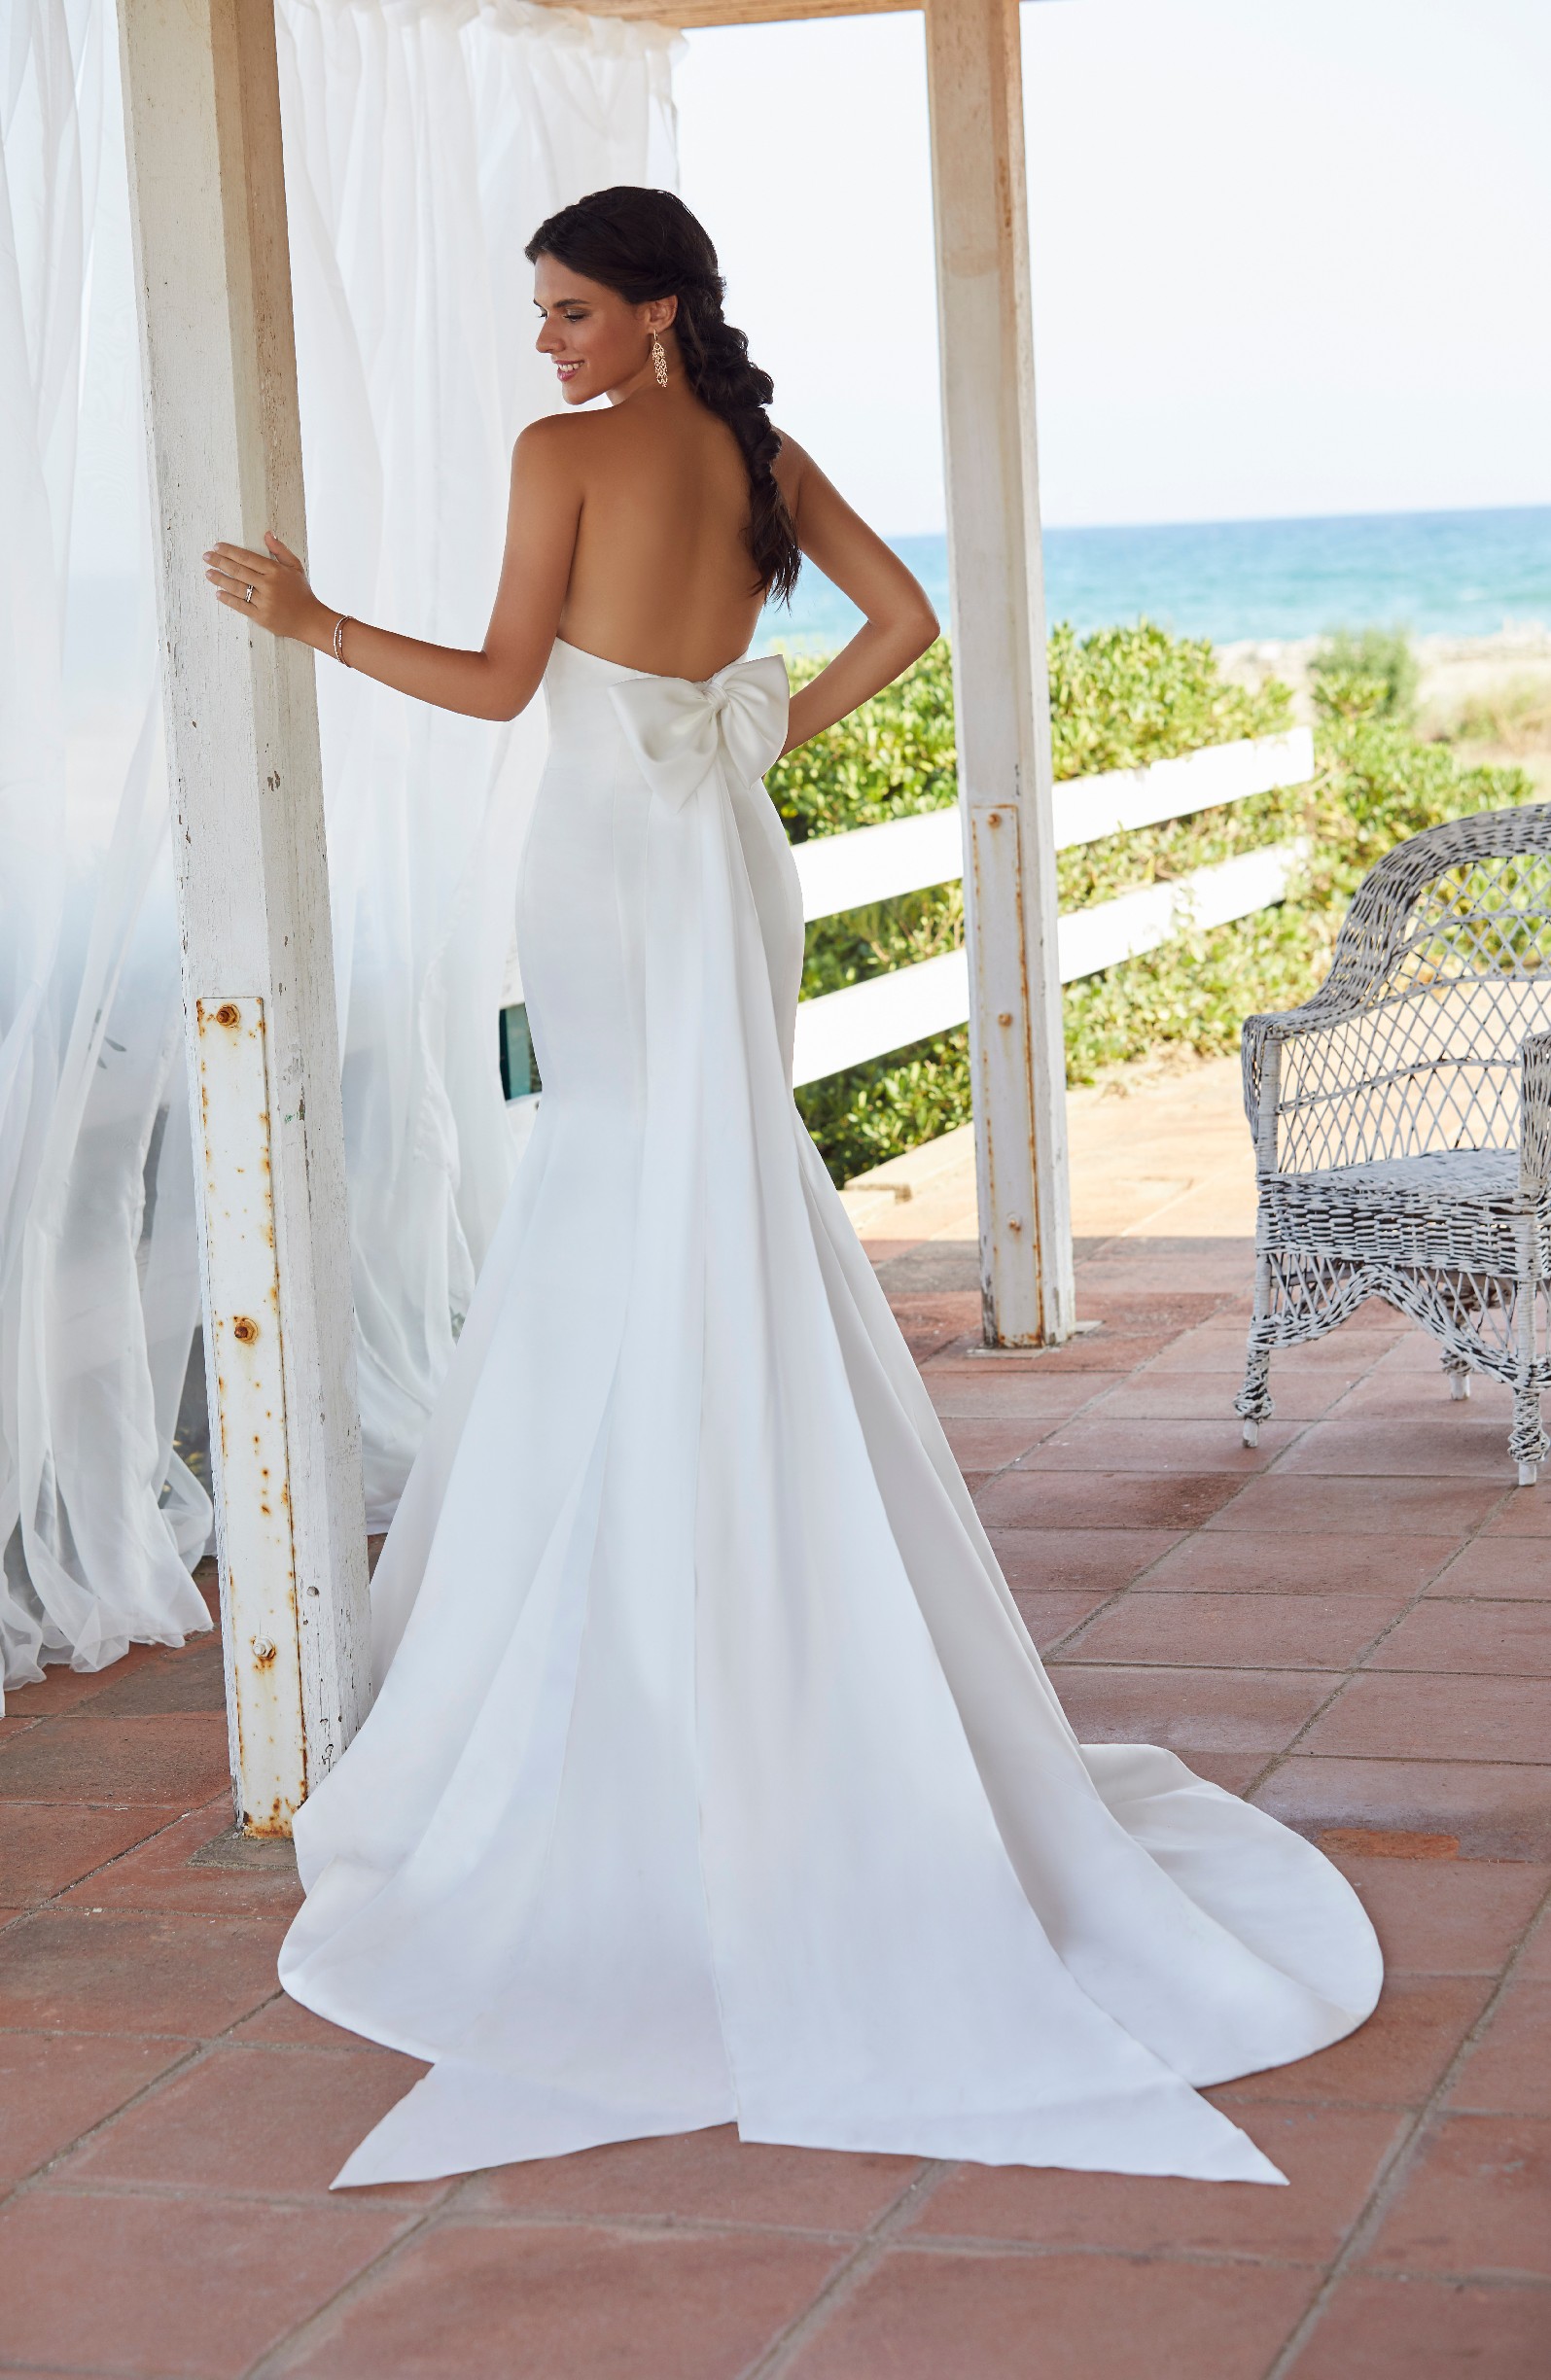 Brunette woman standing on porch in classic mikado wedding dress with low back and bow detail